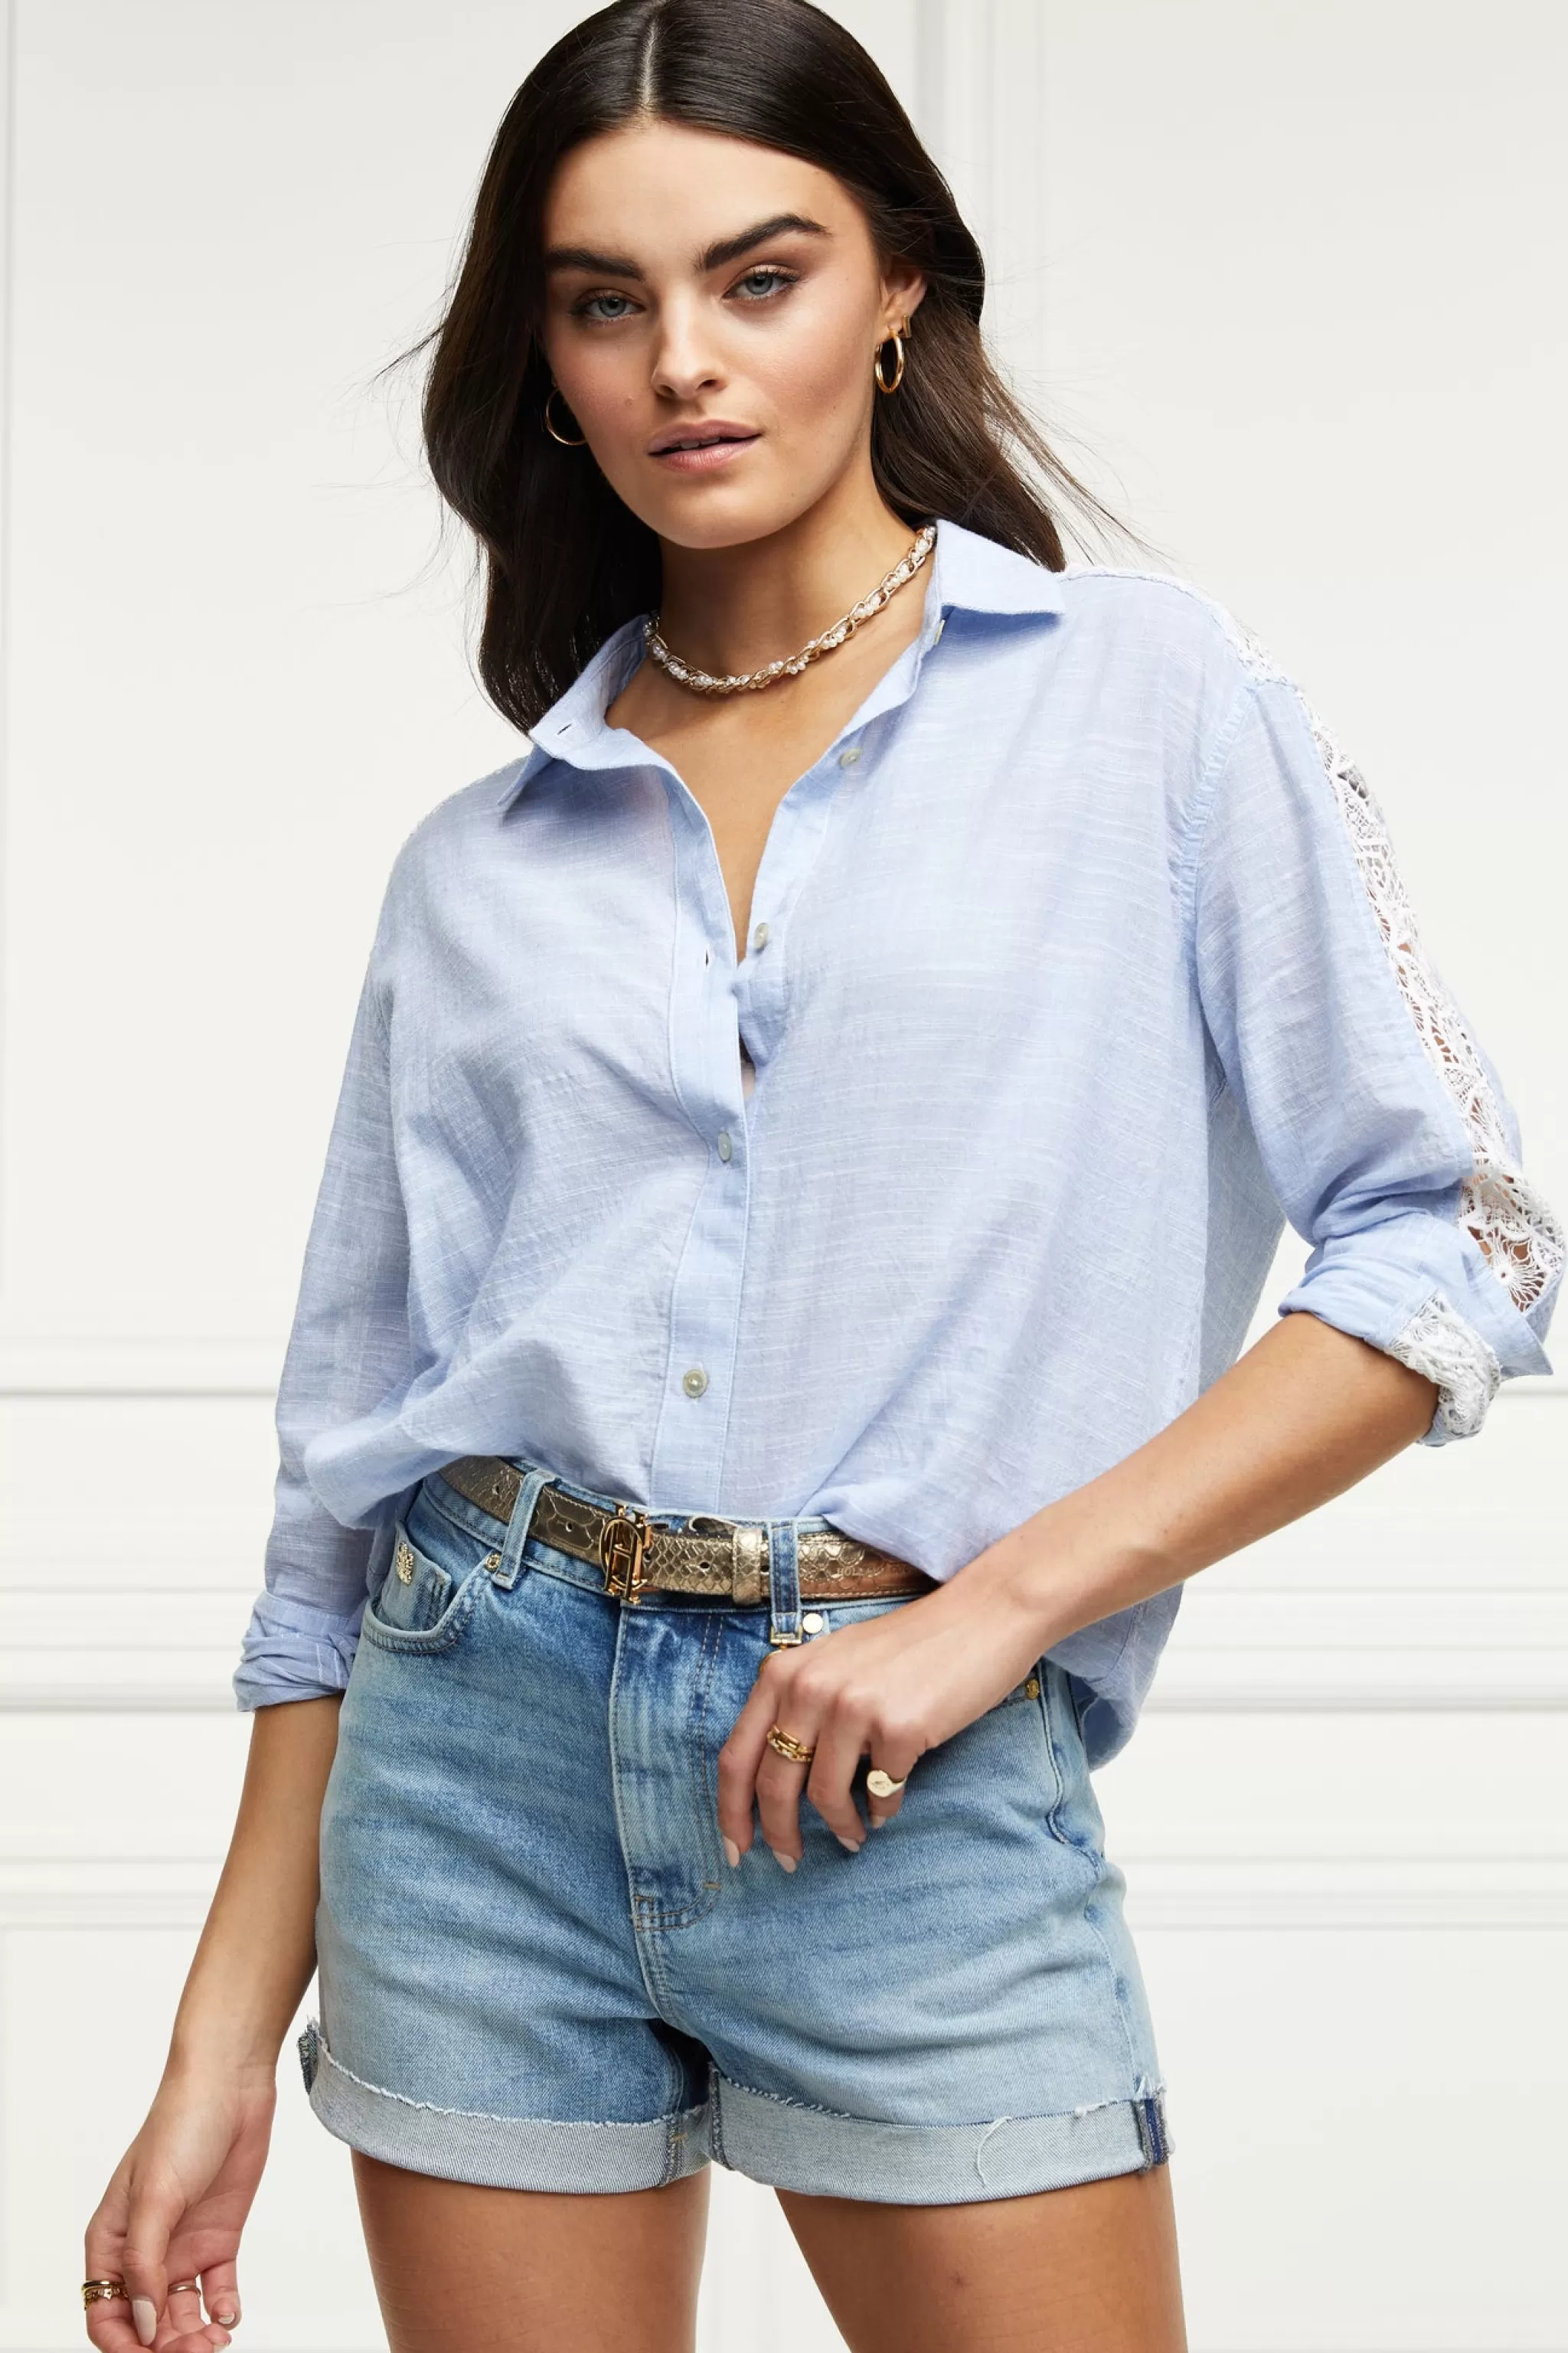 Oversized Cotton Lace Shirt>Holland Cooper Clearance